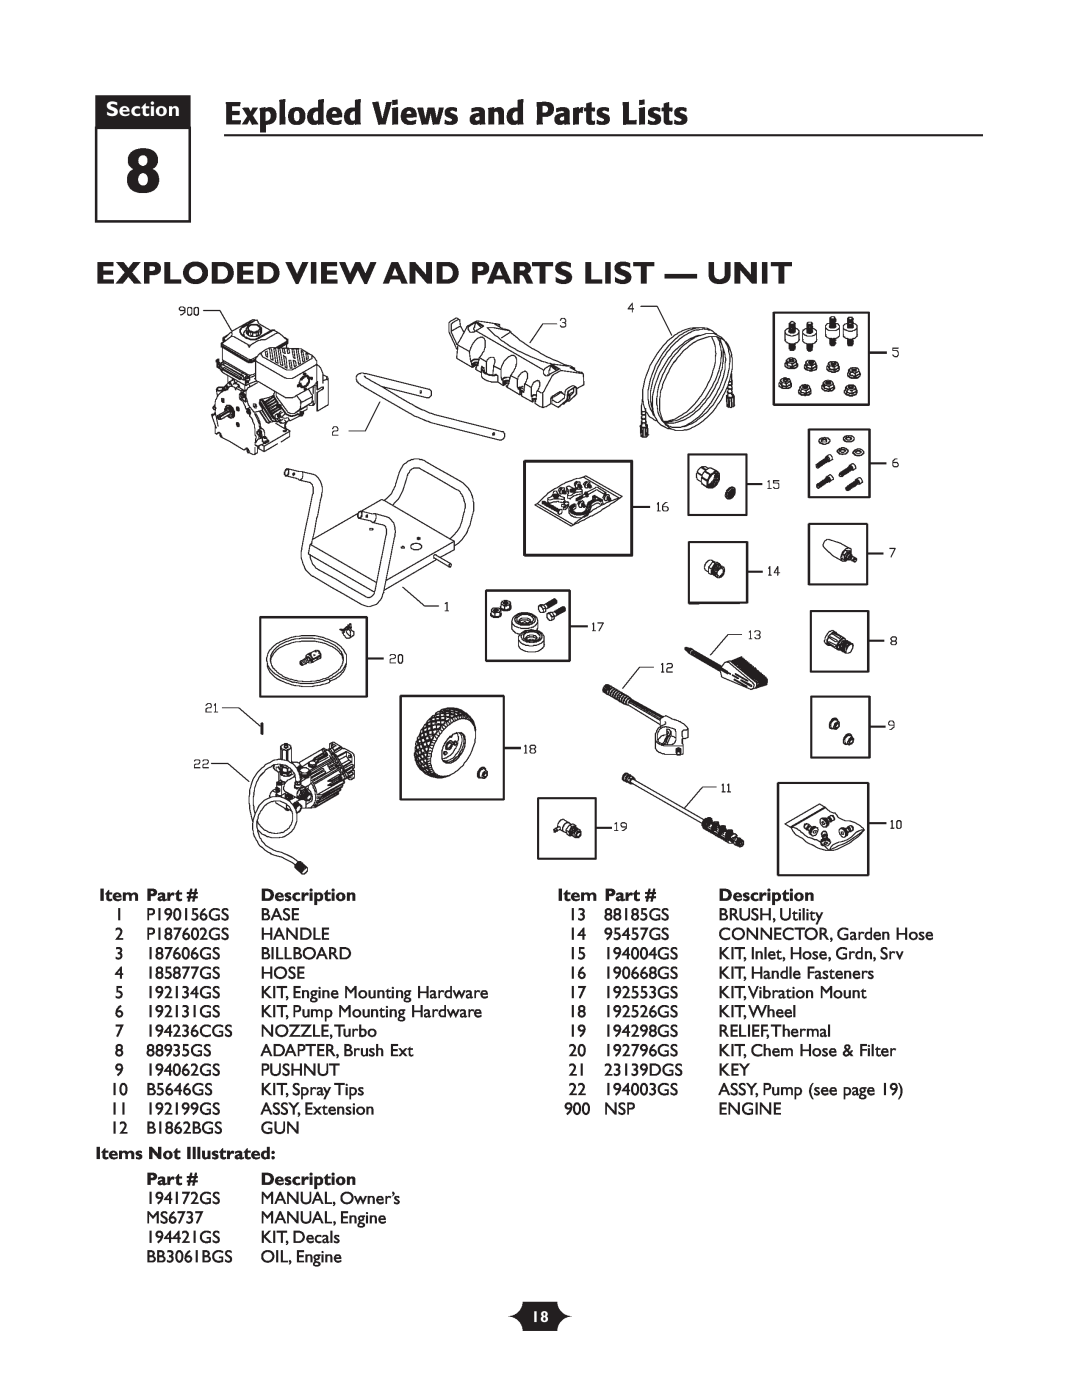 Briggs & Stratton 20209 Section Exploded Views and Parts Lists, Exploded View And Parts List - Unit, Description 